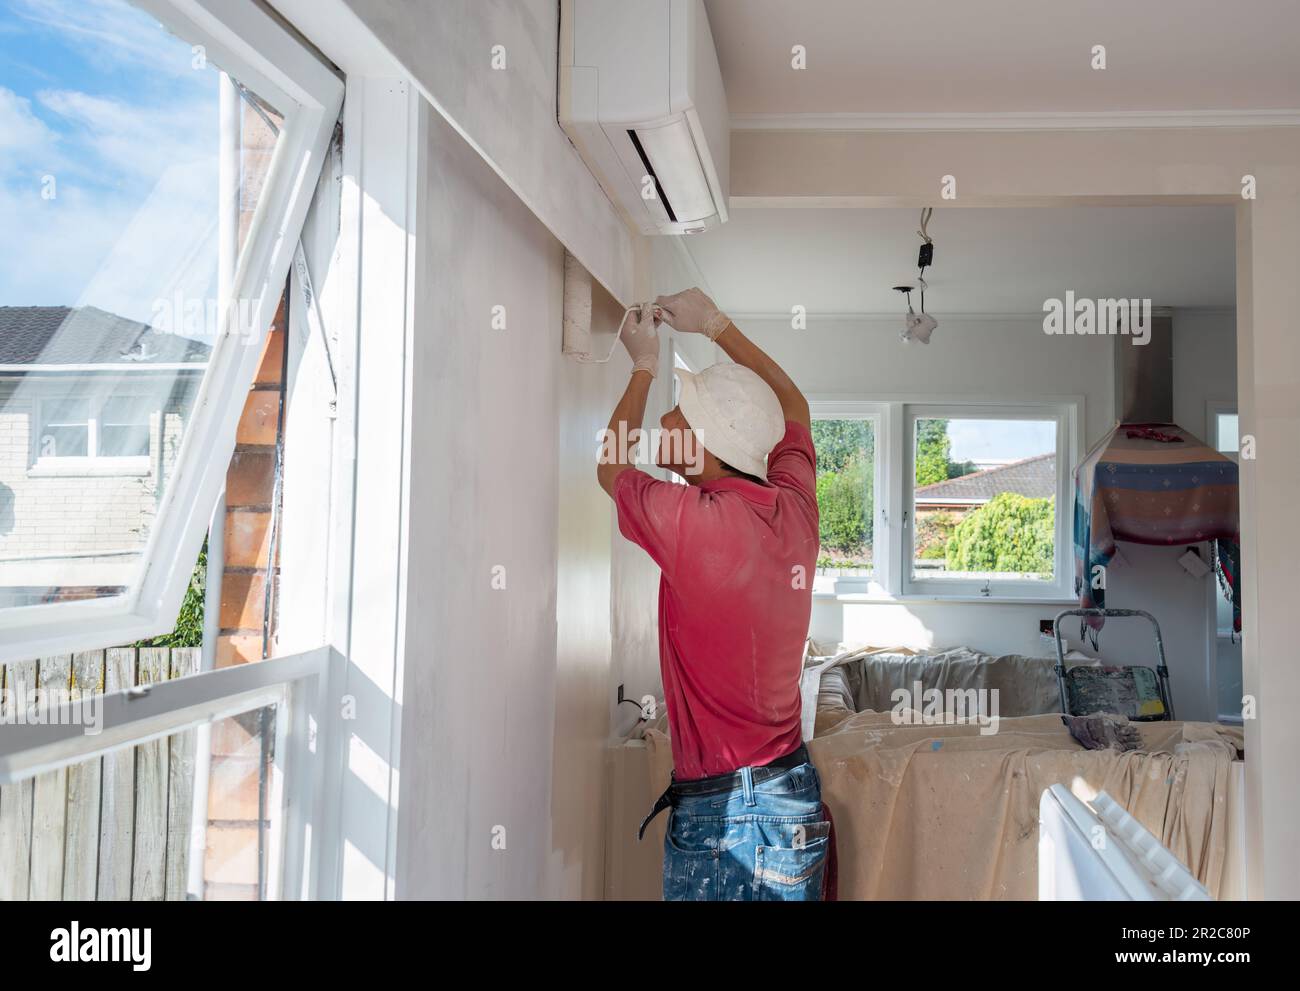 Man painting internal wall with a roller in a residential home. Home renovation project. Auckland. Stock Photo